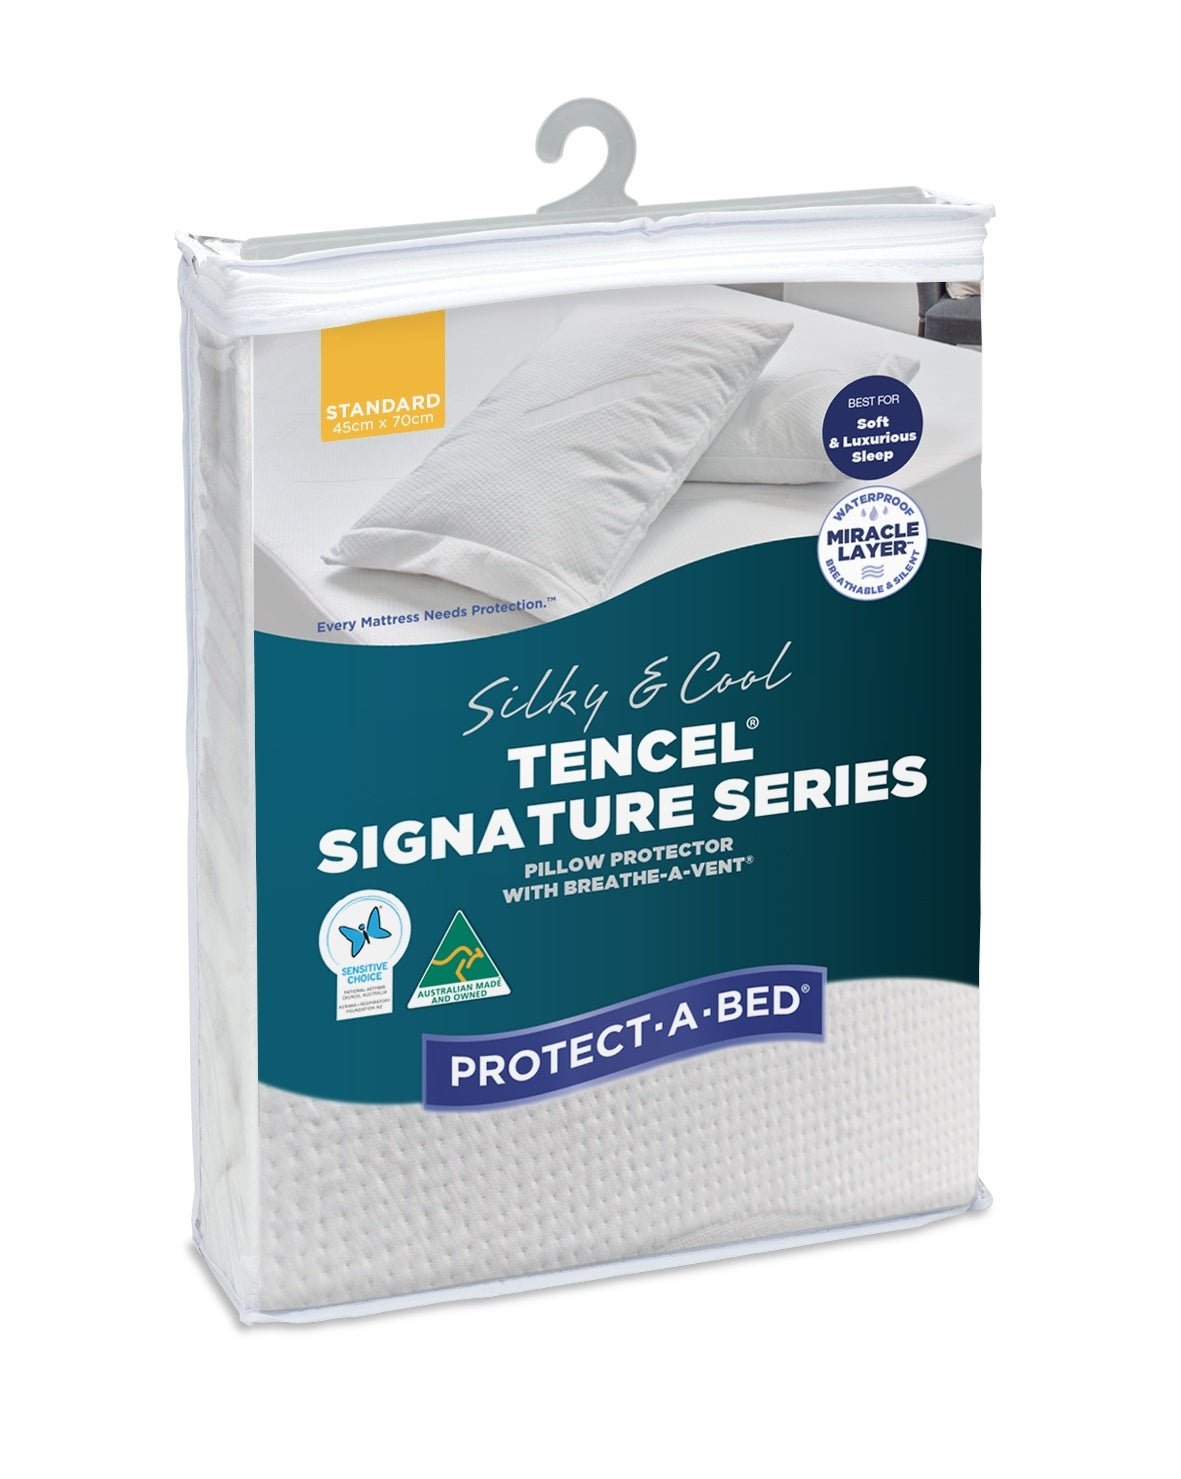 Protect-A-Bed Signature Pillow Protector - Mattress & Pillow ScienceProtection